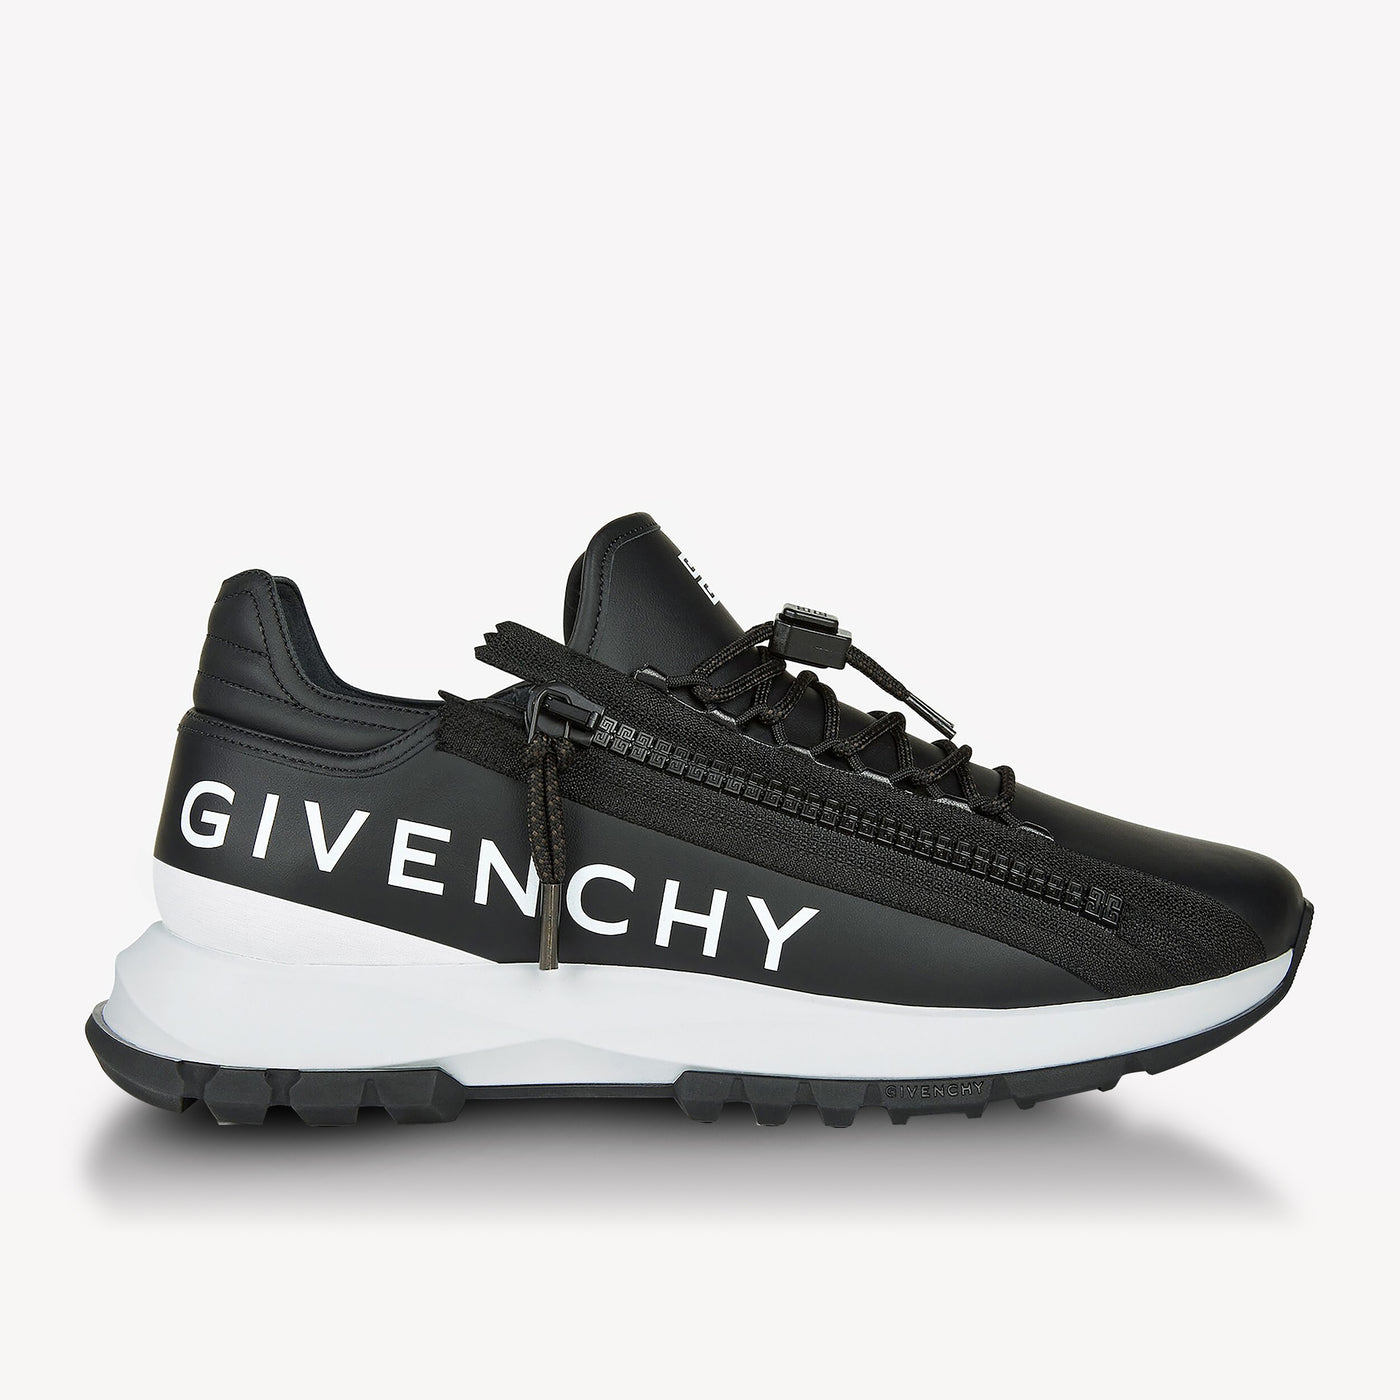 Givenchy Spectre Runner Sneakers